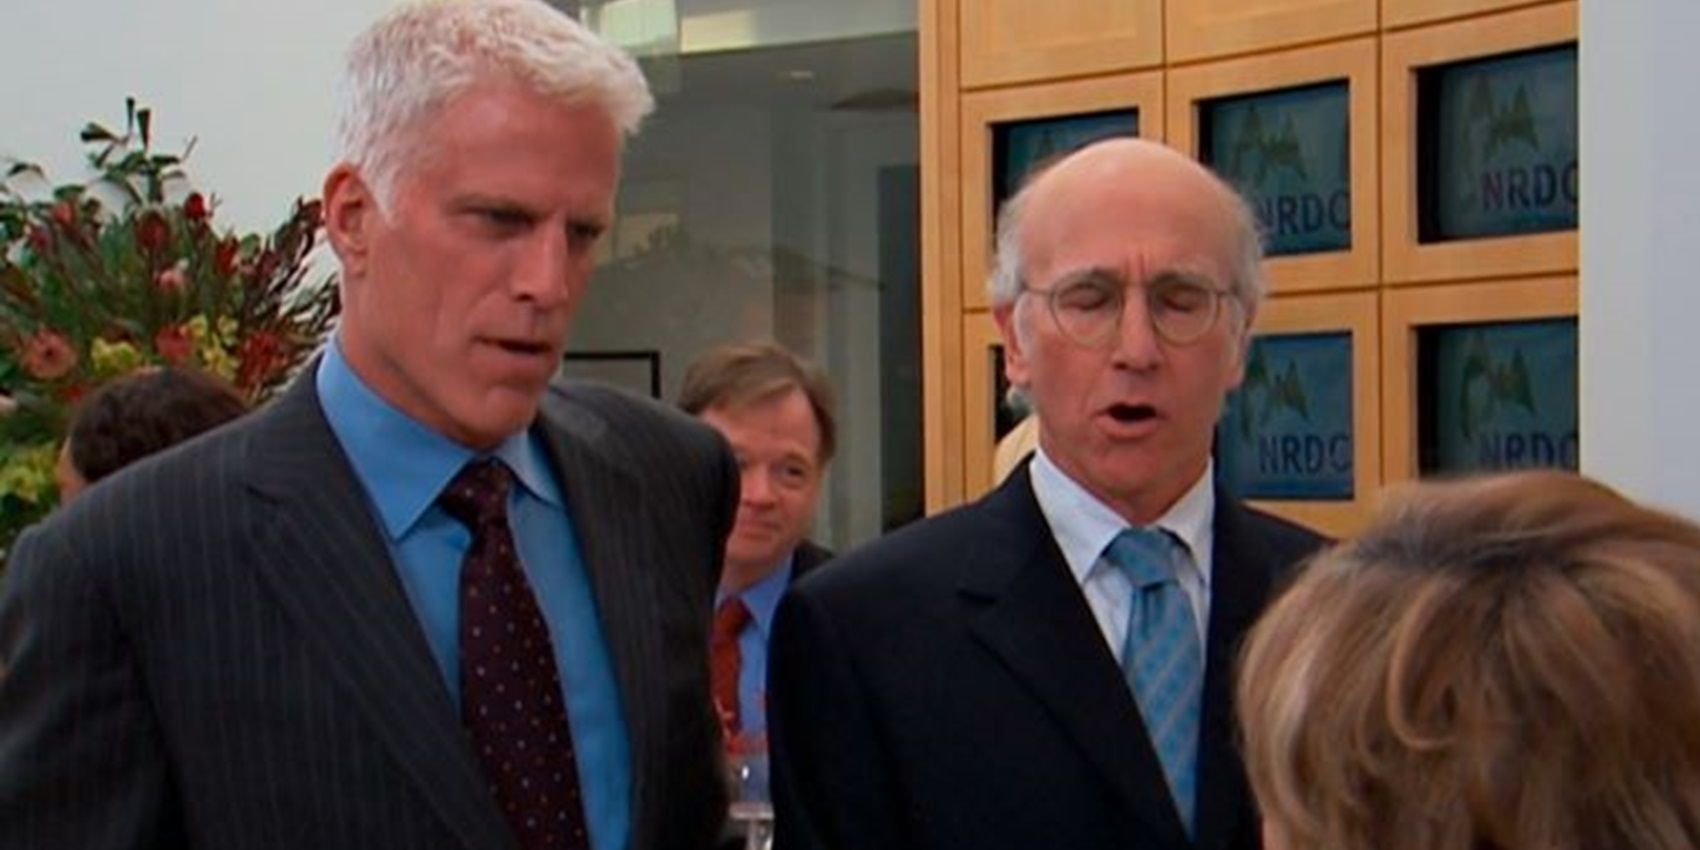 20 Best Curb Your Enthusiasm Episodes Of All Time, Ranked